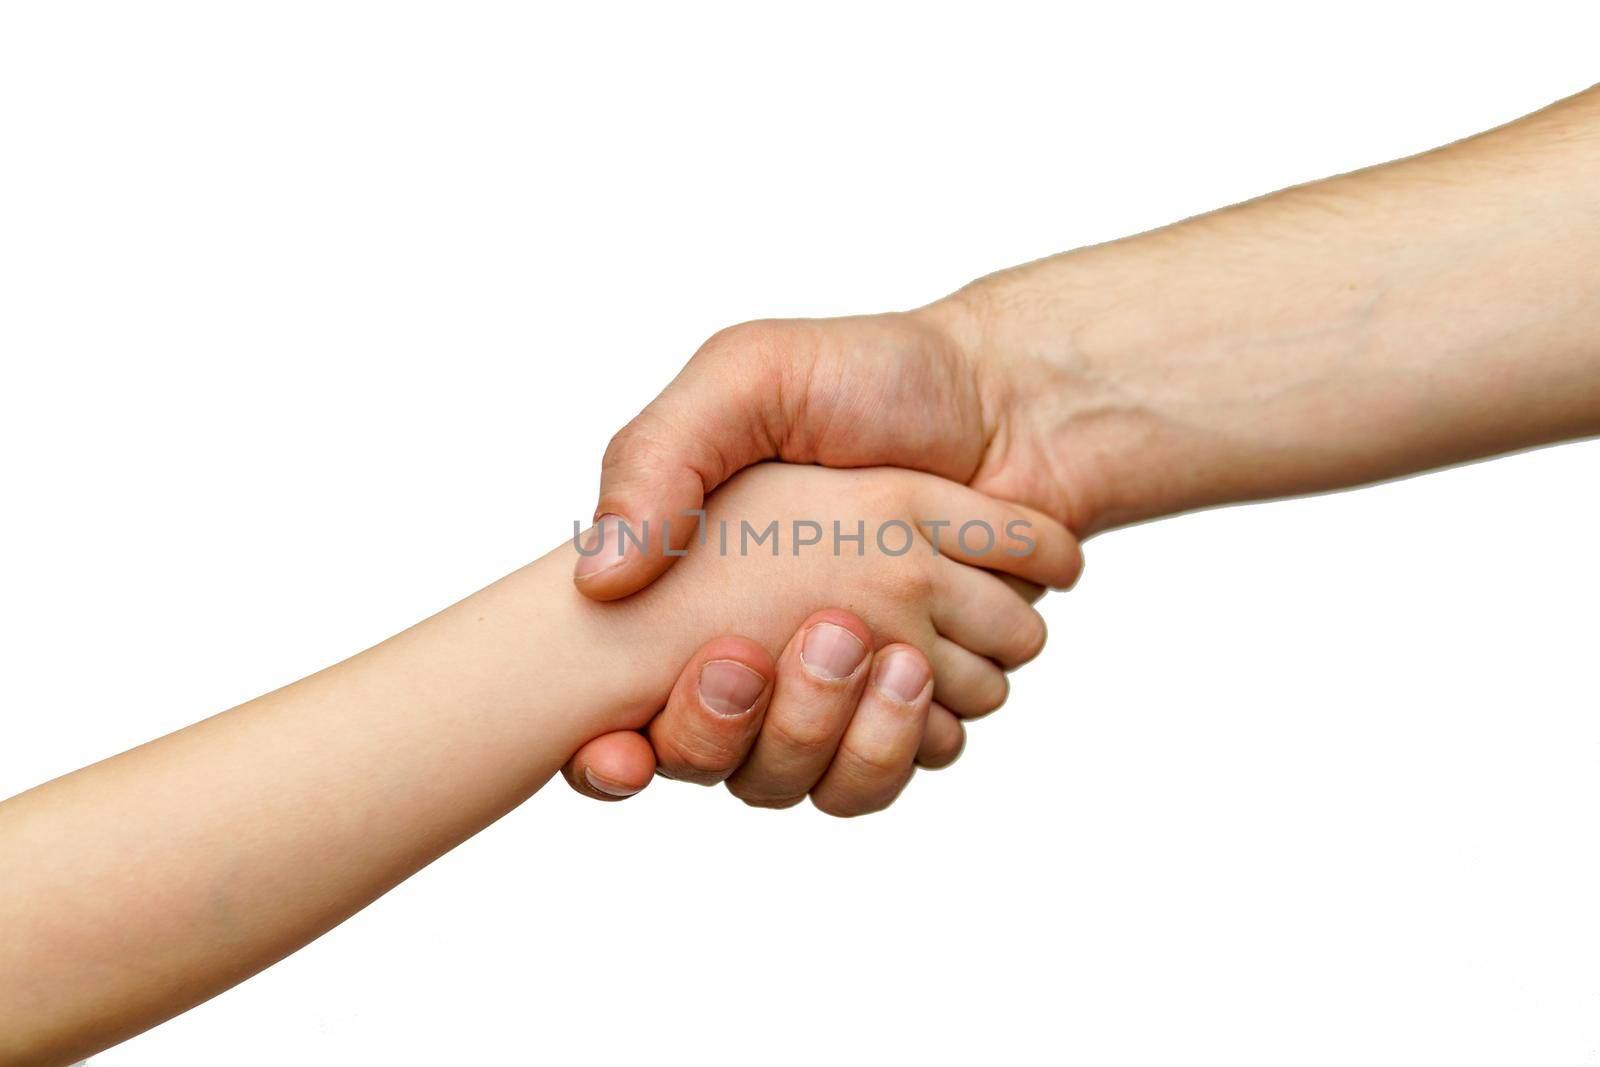 Hands shake each other against a white background isolated child and adult